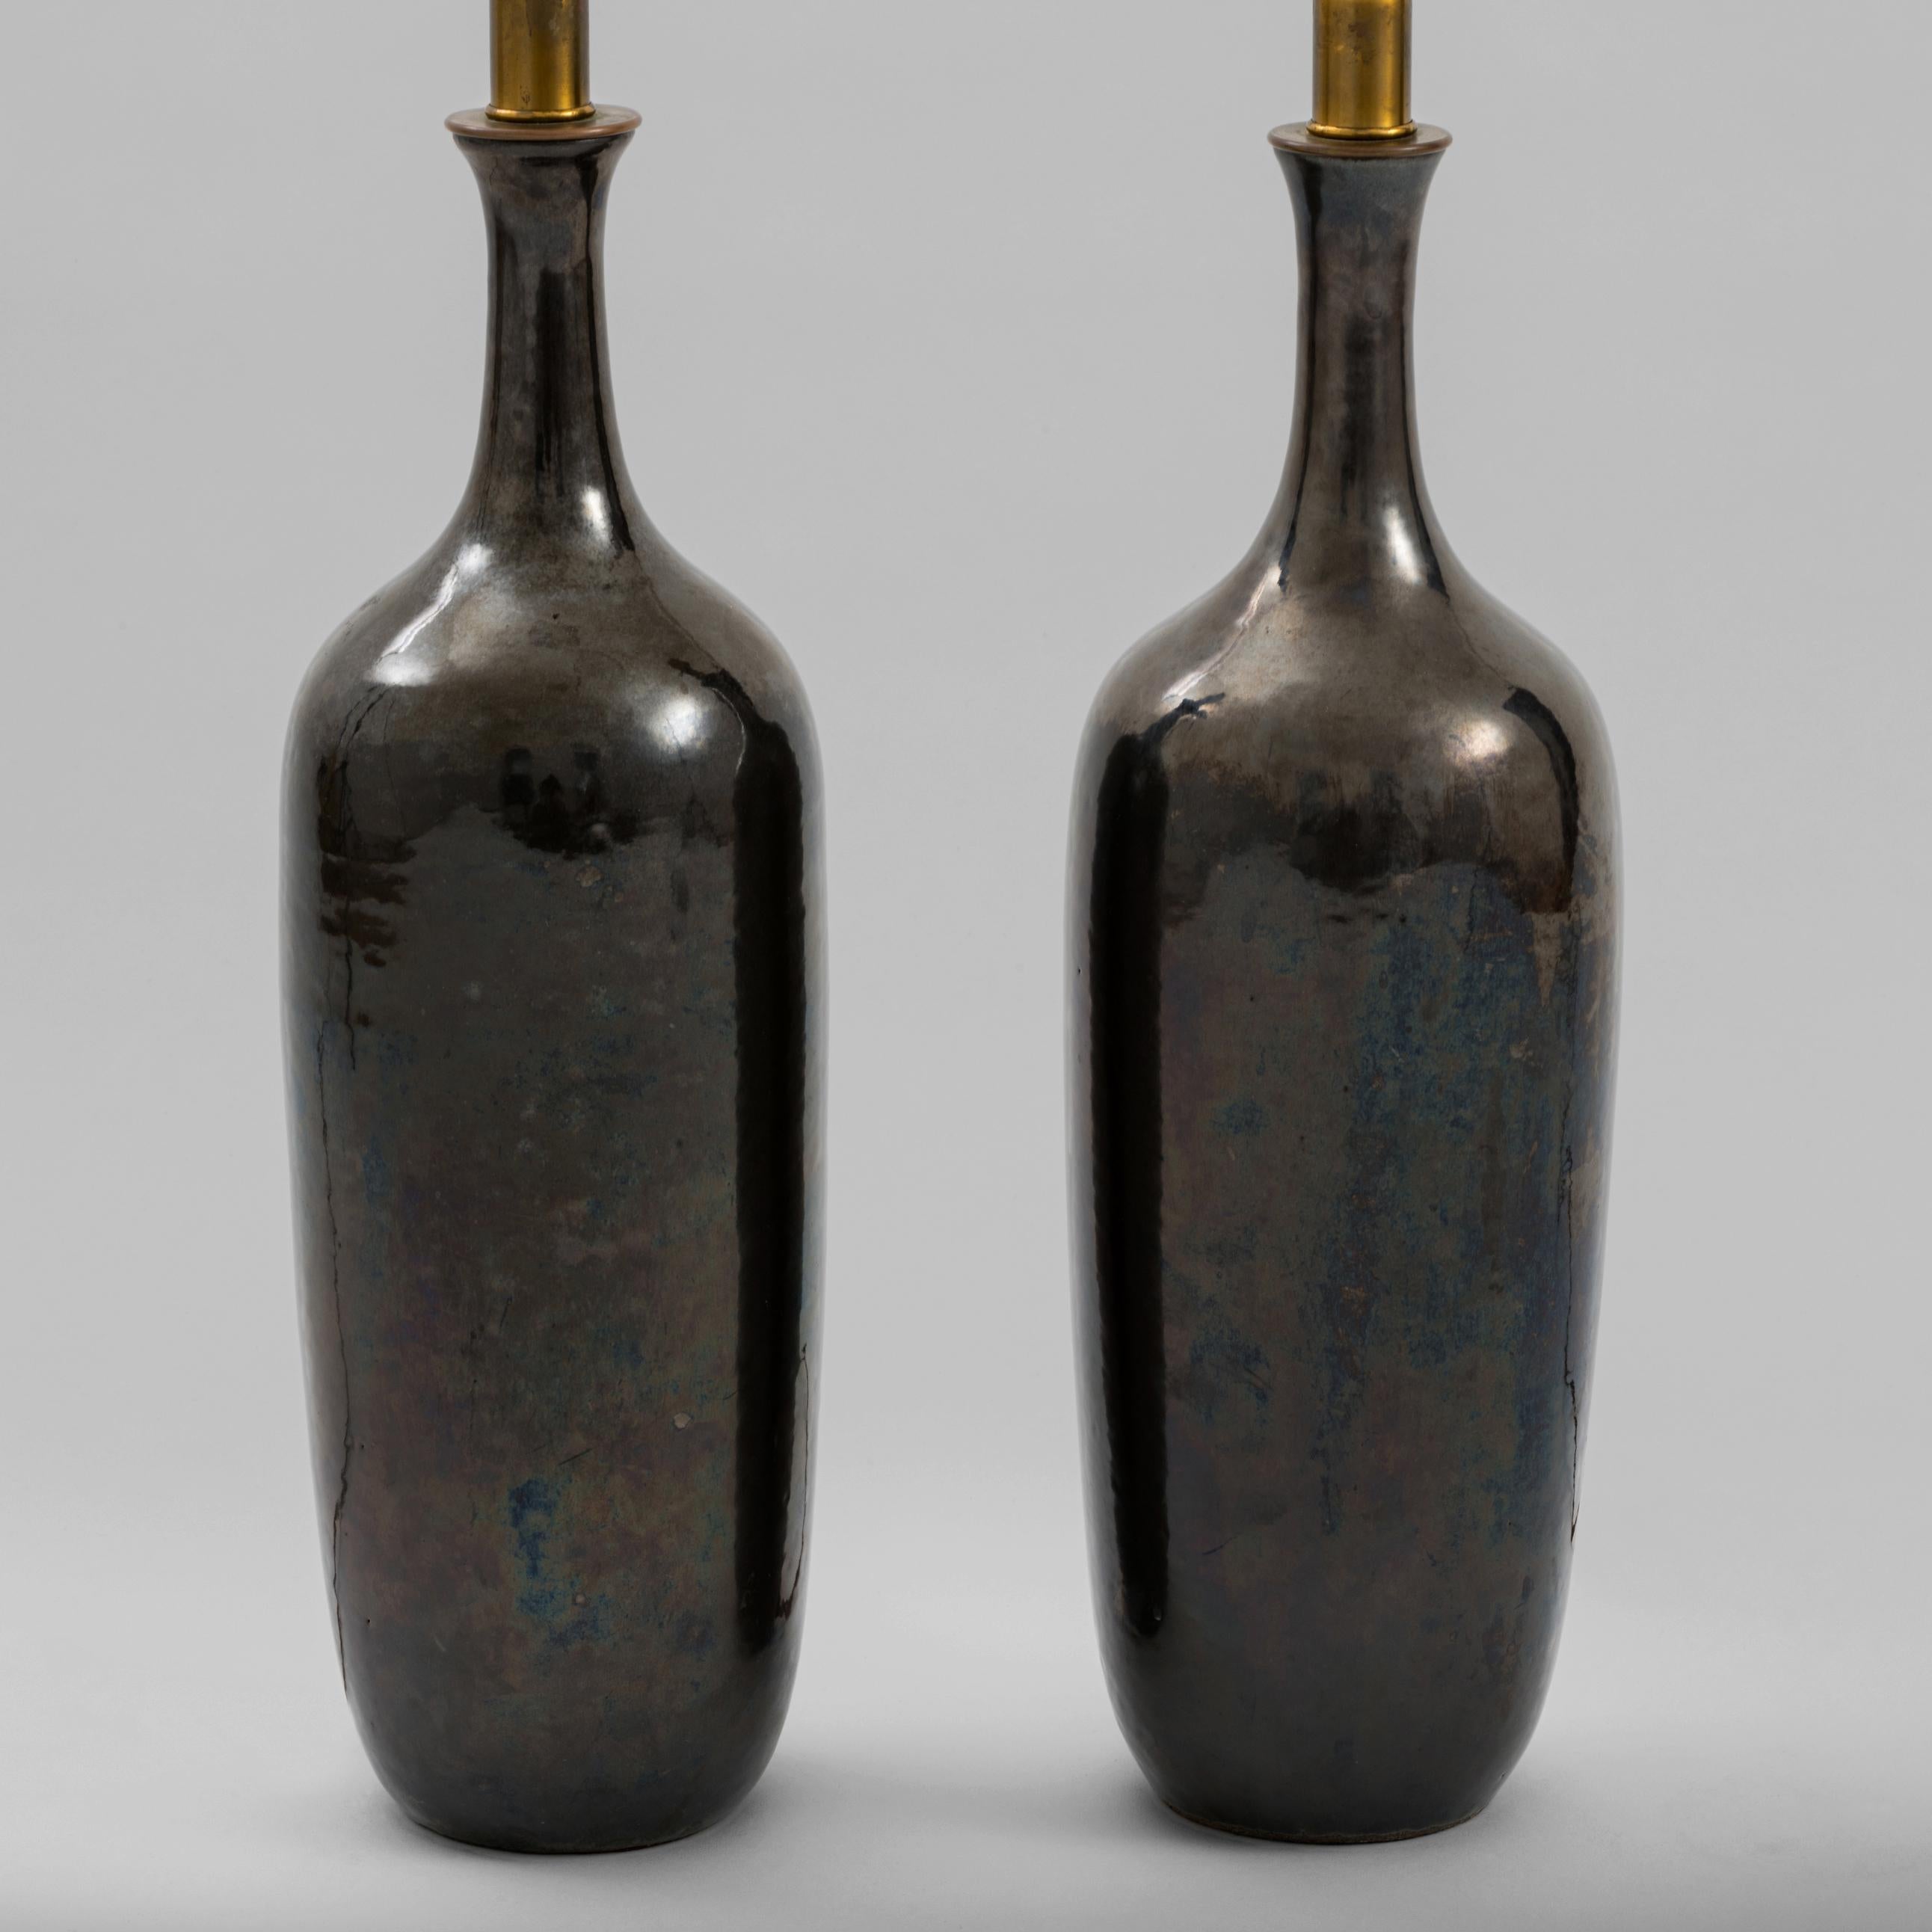 Pair of handthrown, bottle form ceramic table lamps from the 3300 Series, model 3310, designed by Lee Rosen for Design Technics, finished in rare gunmetal glaze, referred to as 